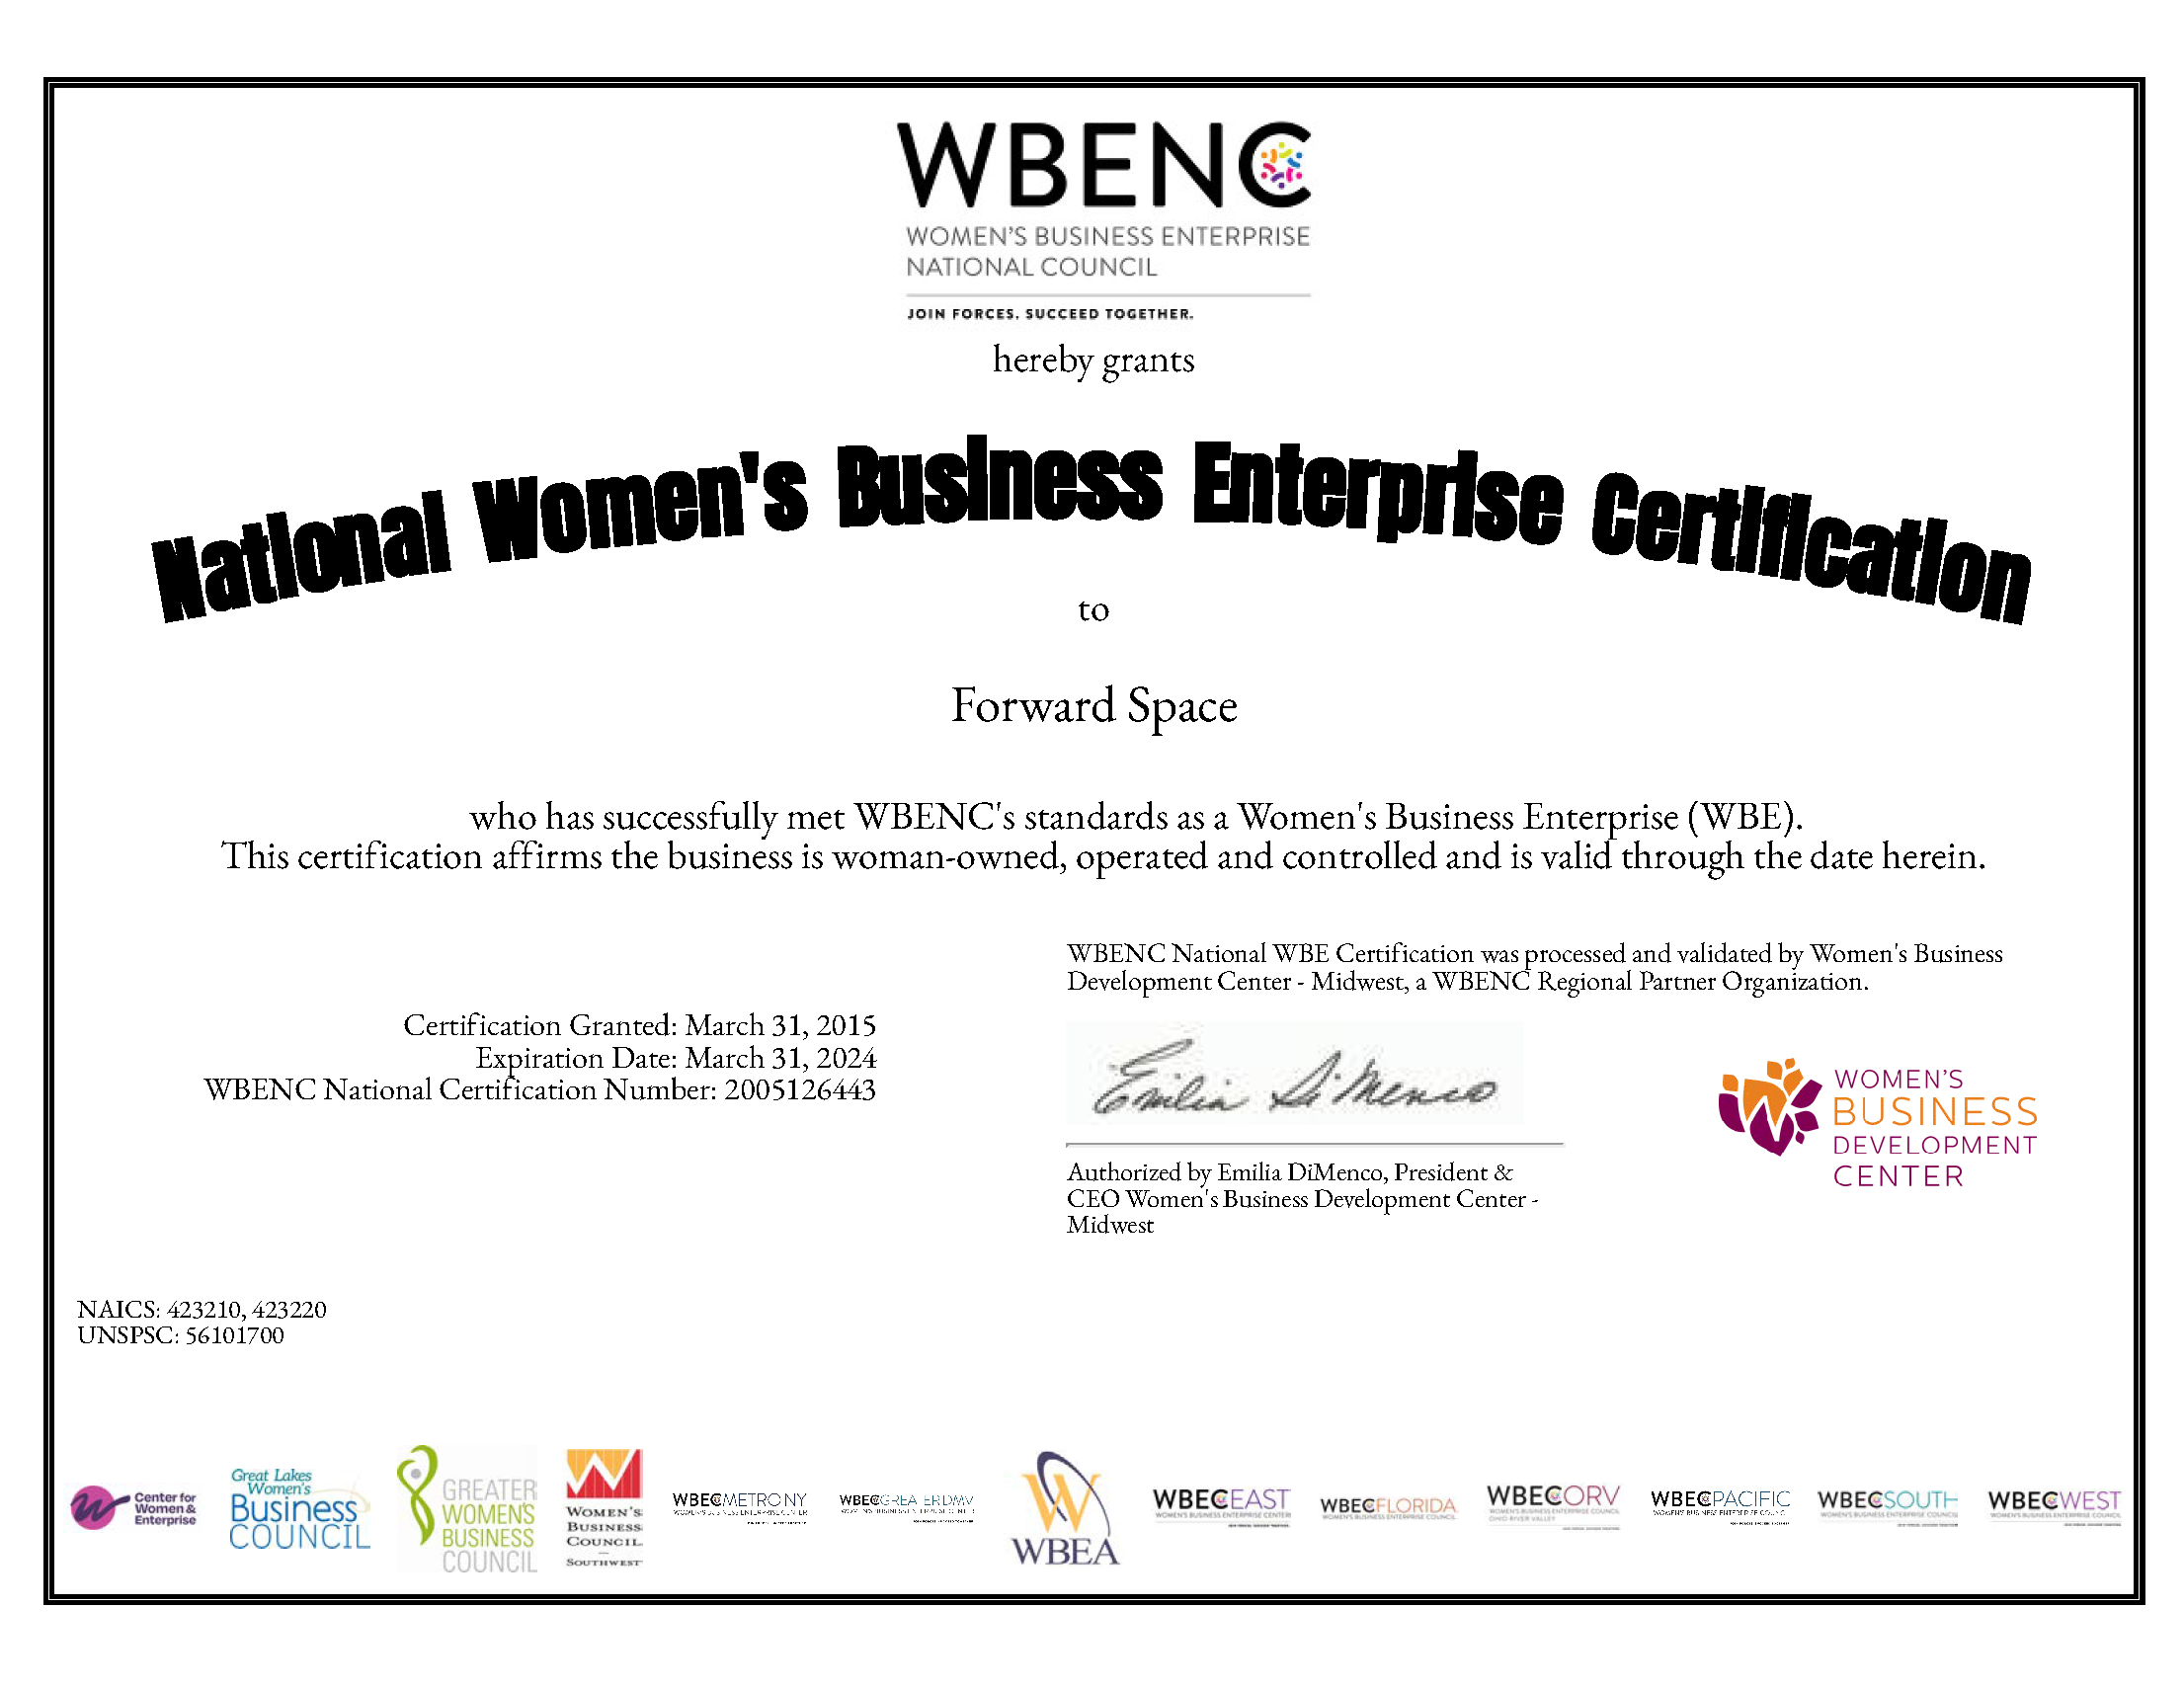 A WBENC Certificate for Forward Space 